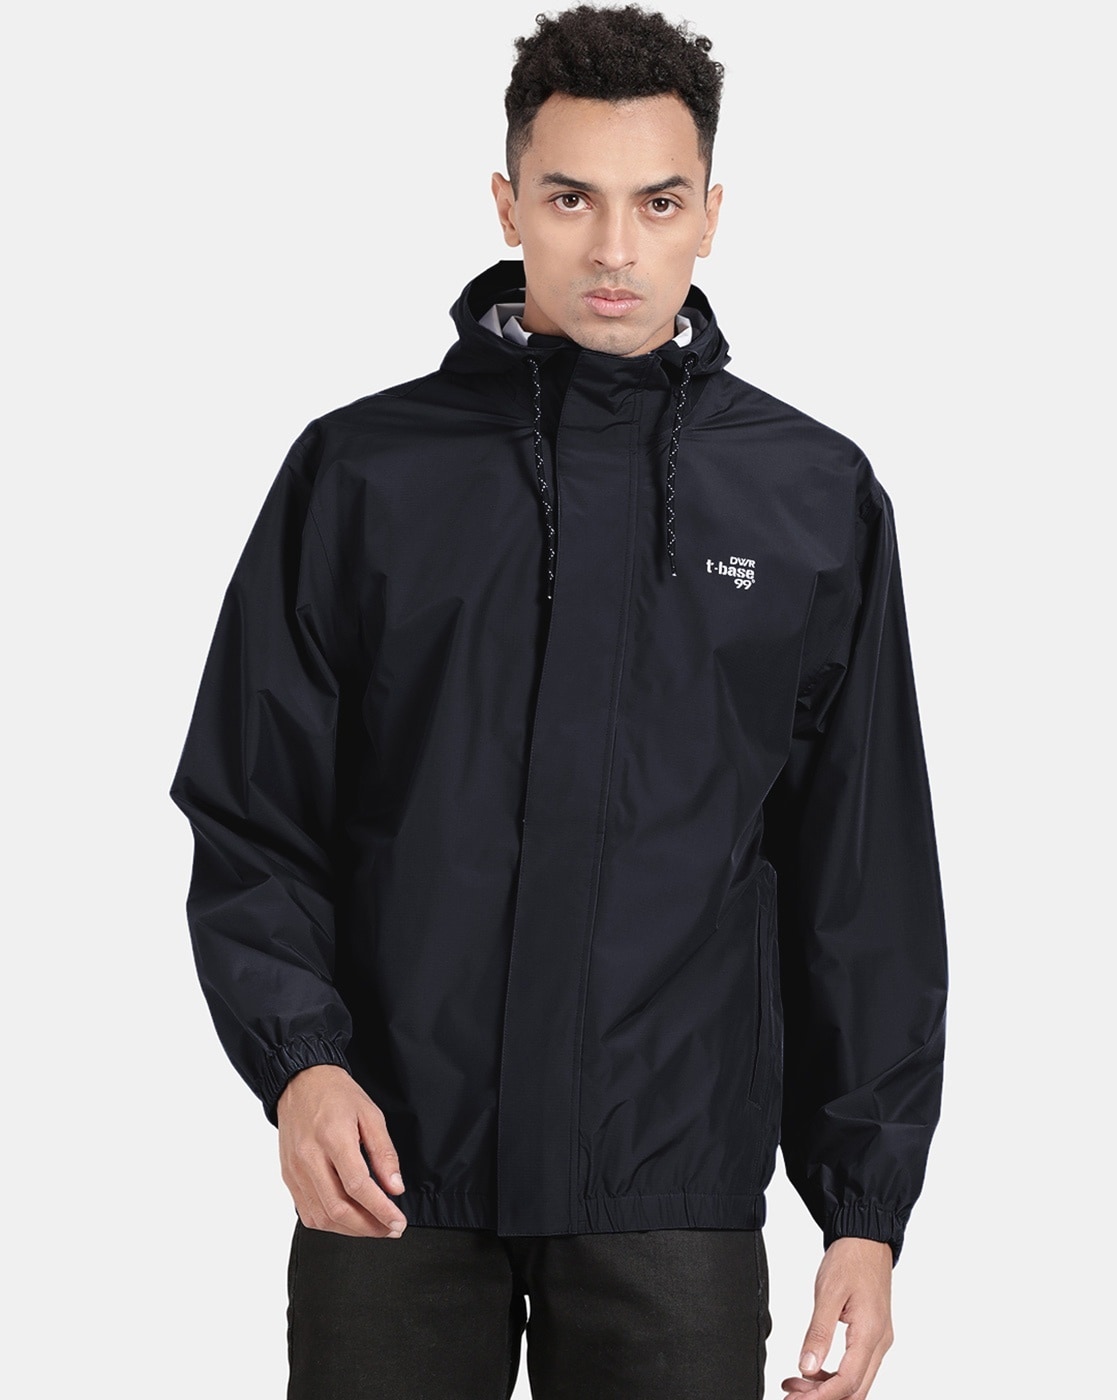 Buy Navy and Windcheaters for Men by T-Base Online Ajio.com